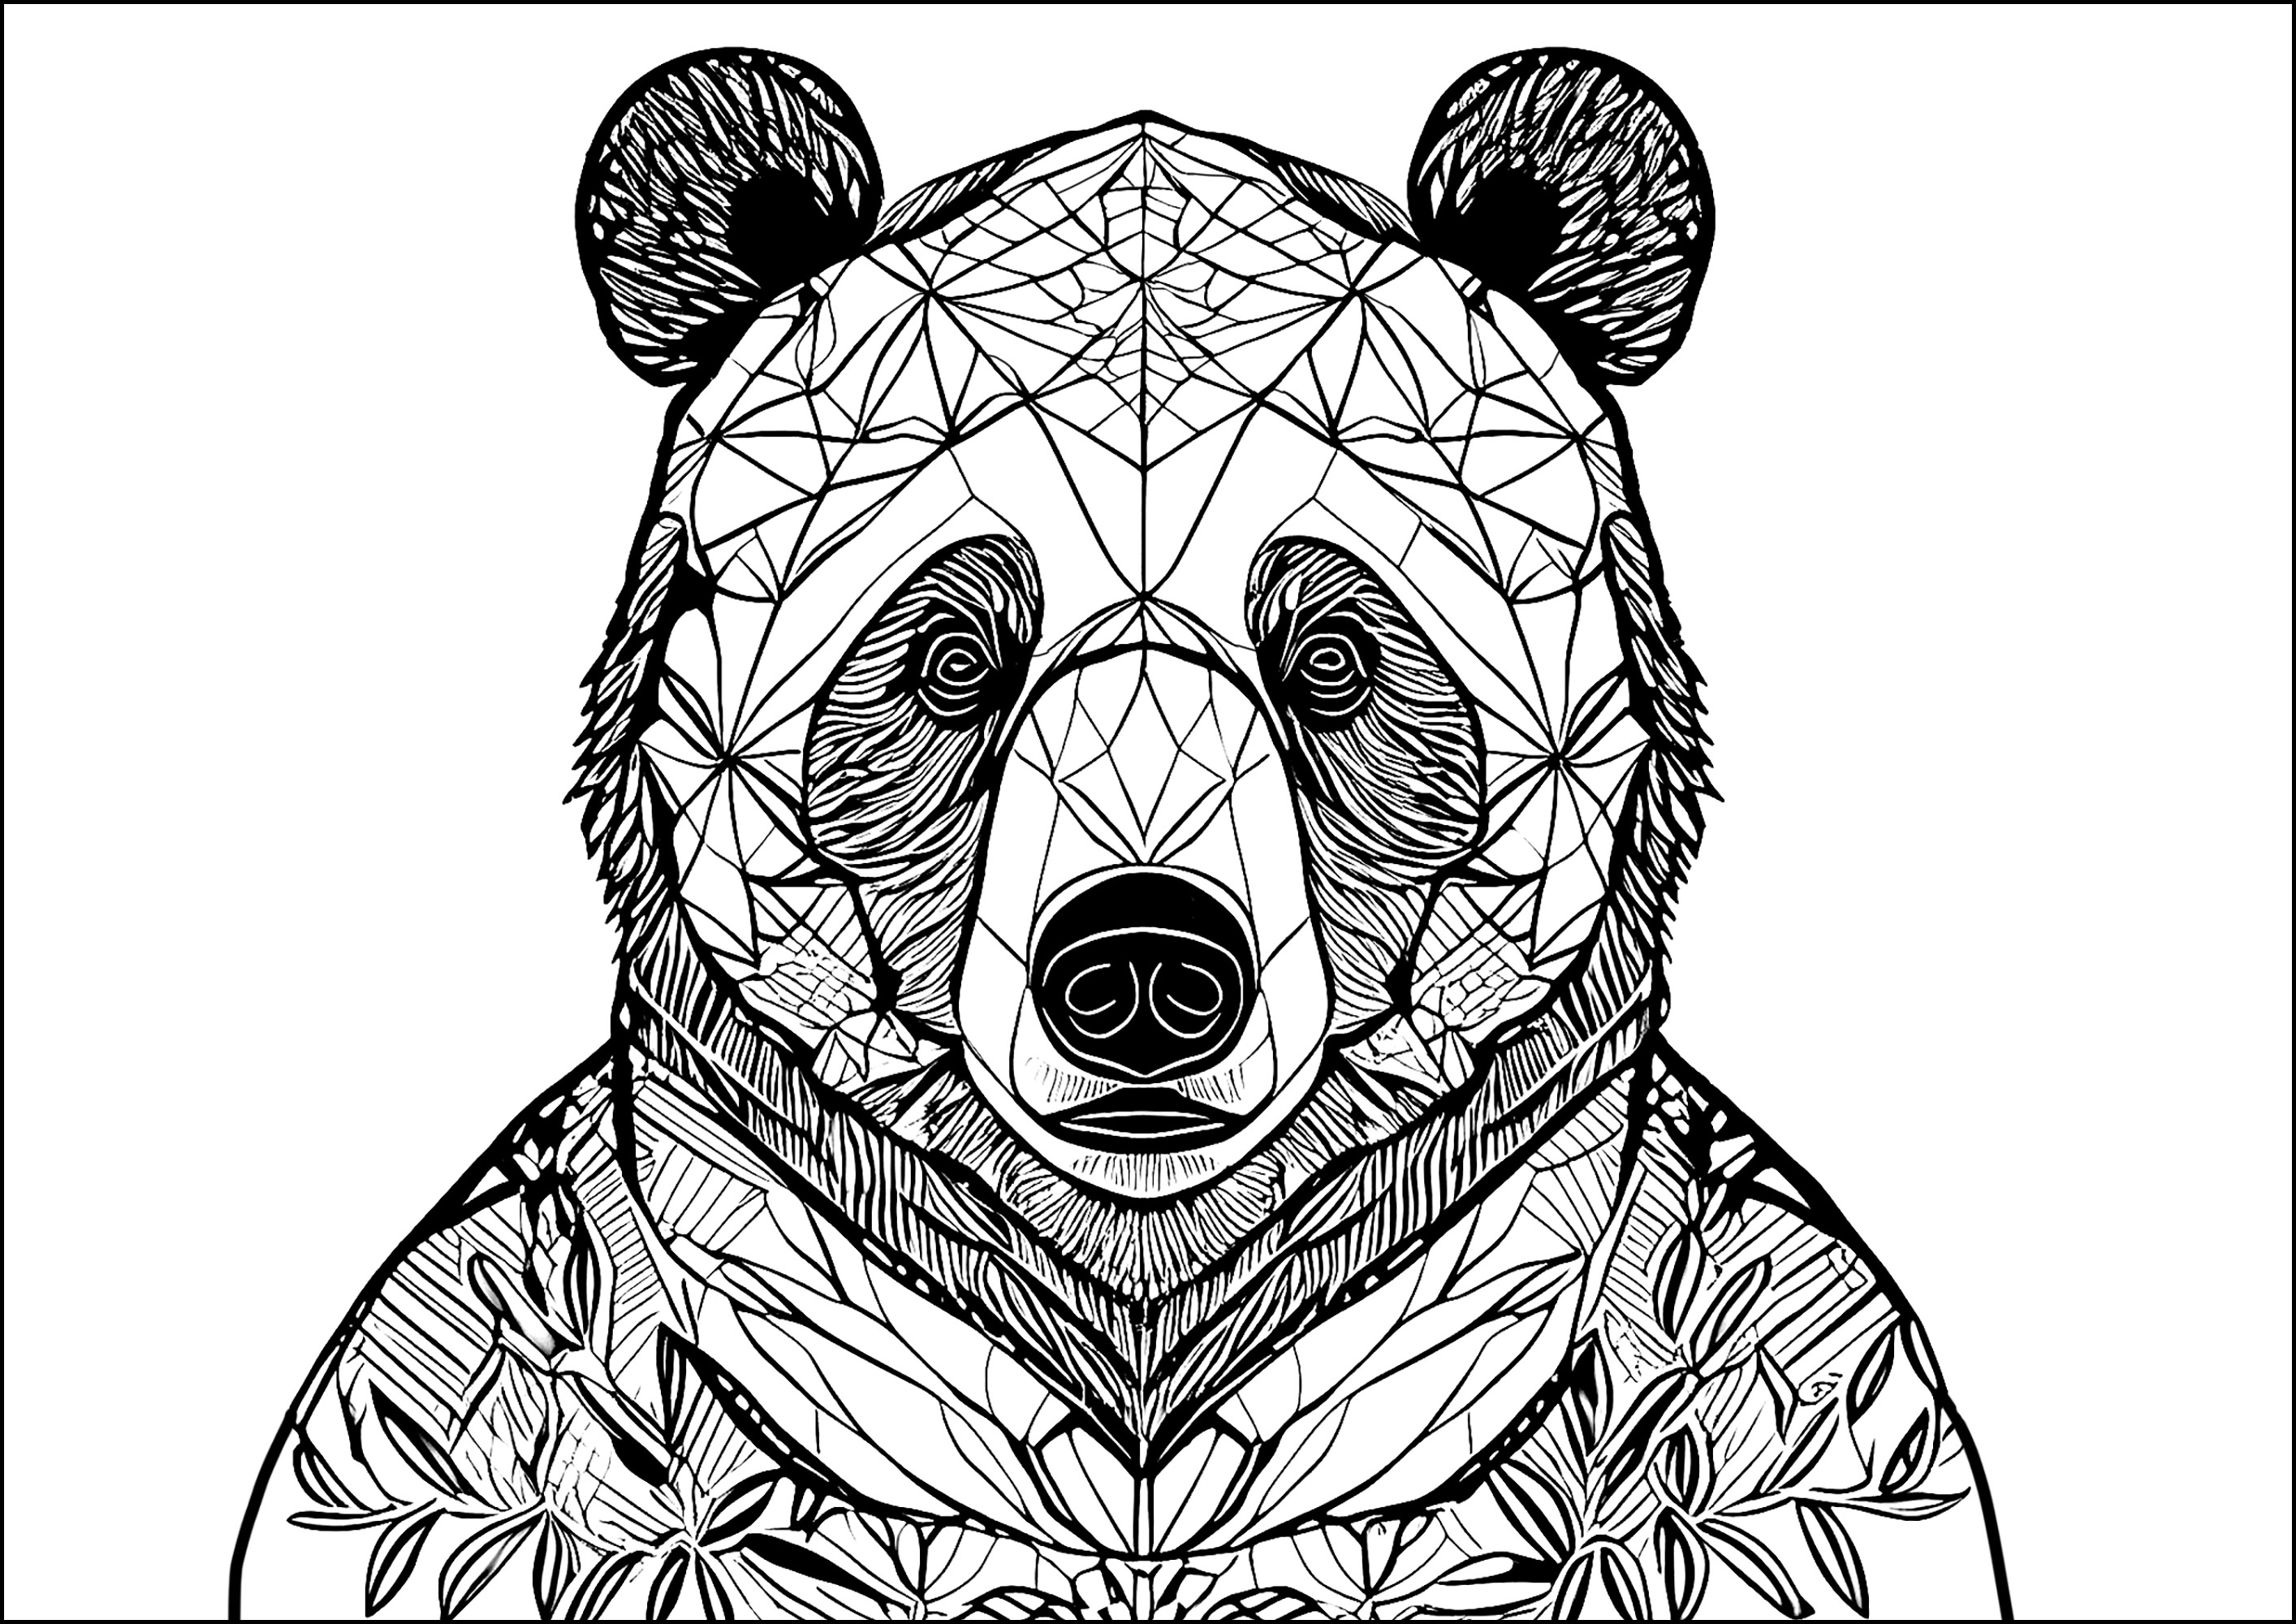 Large bear with intricate patterns. A bear with many intricate patterns to color